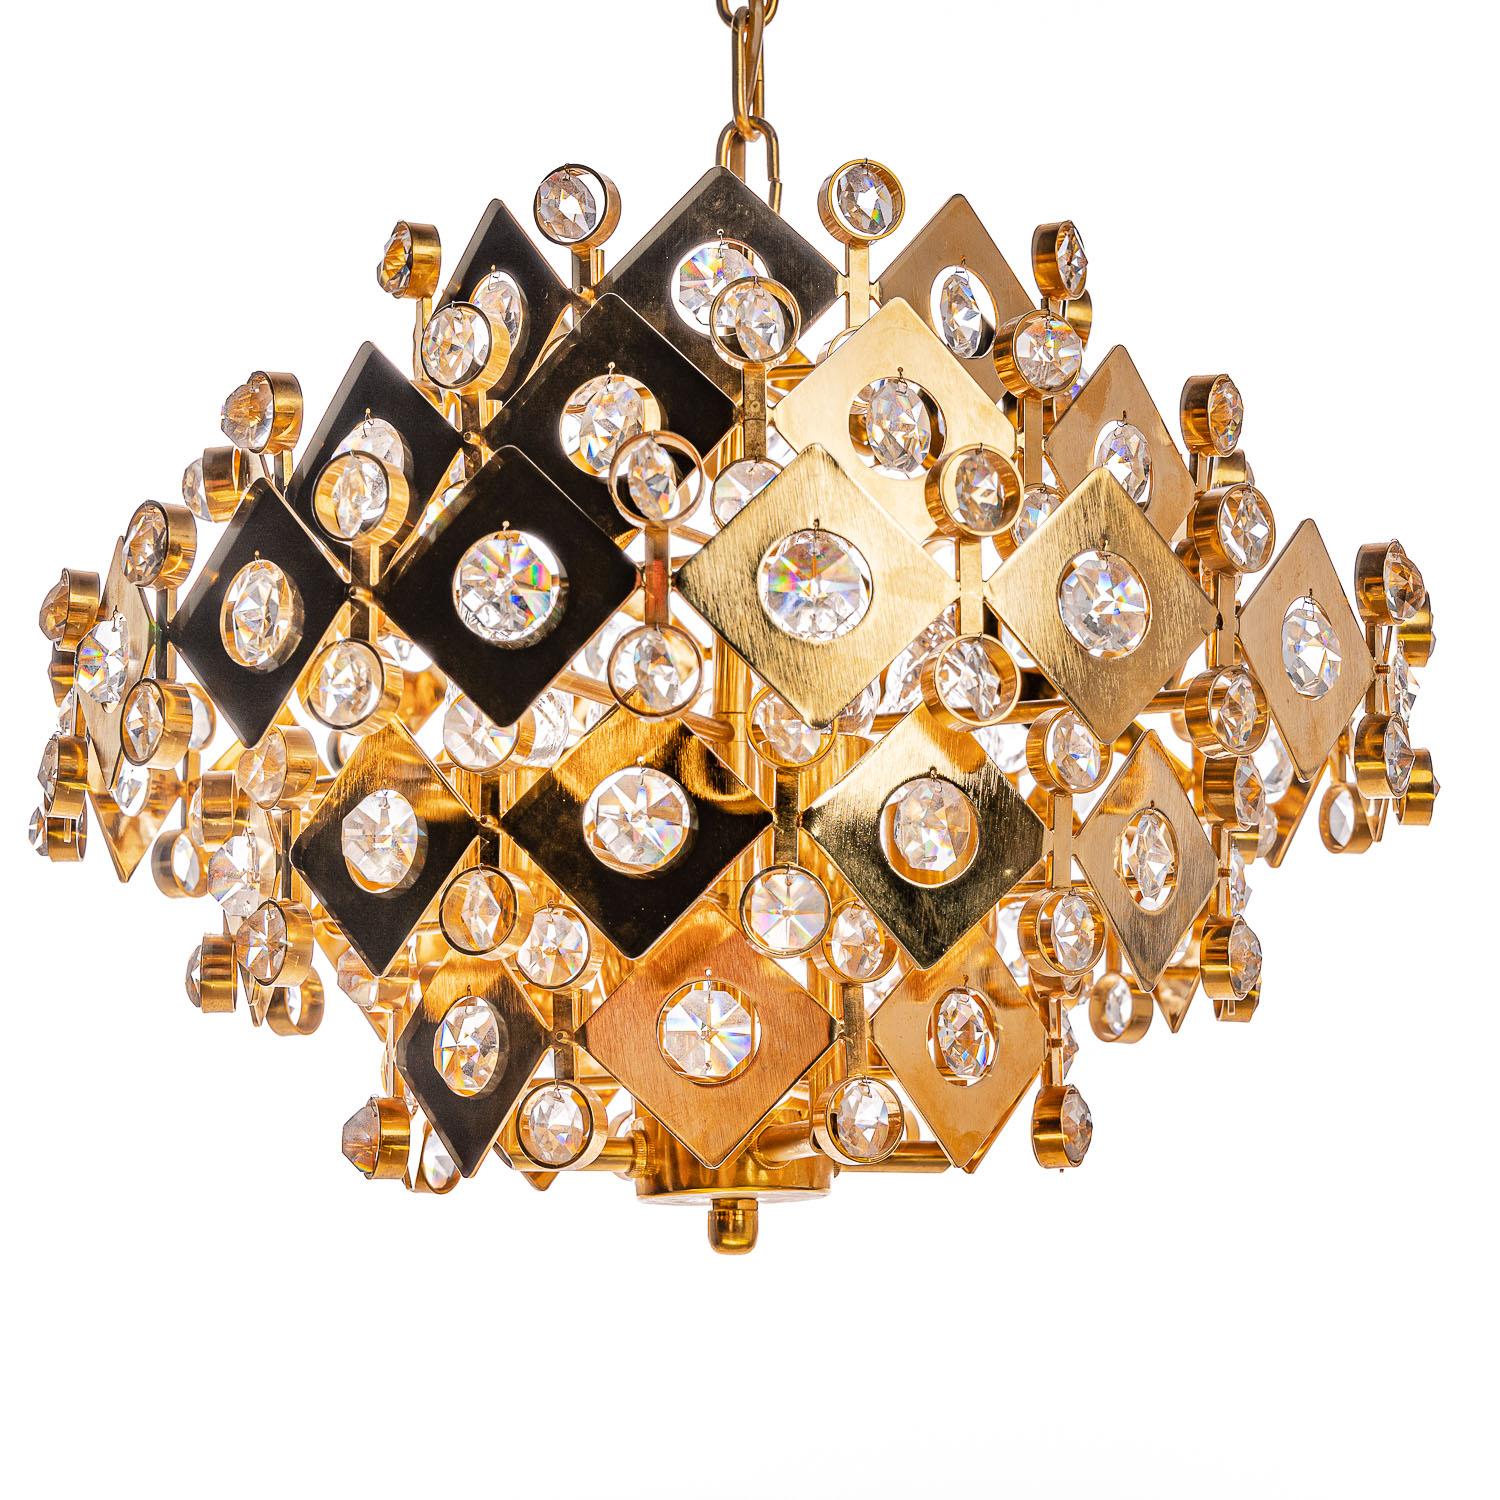 Stunning 4 light pendant that will be an eye-catcher of the room. All tiers with crystal glass ornaments. 4 x E14 sockets.